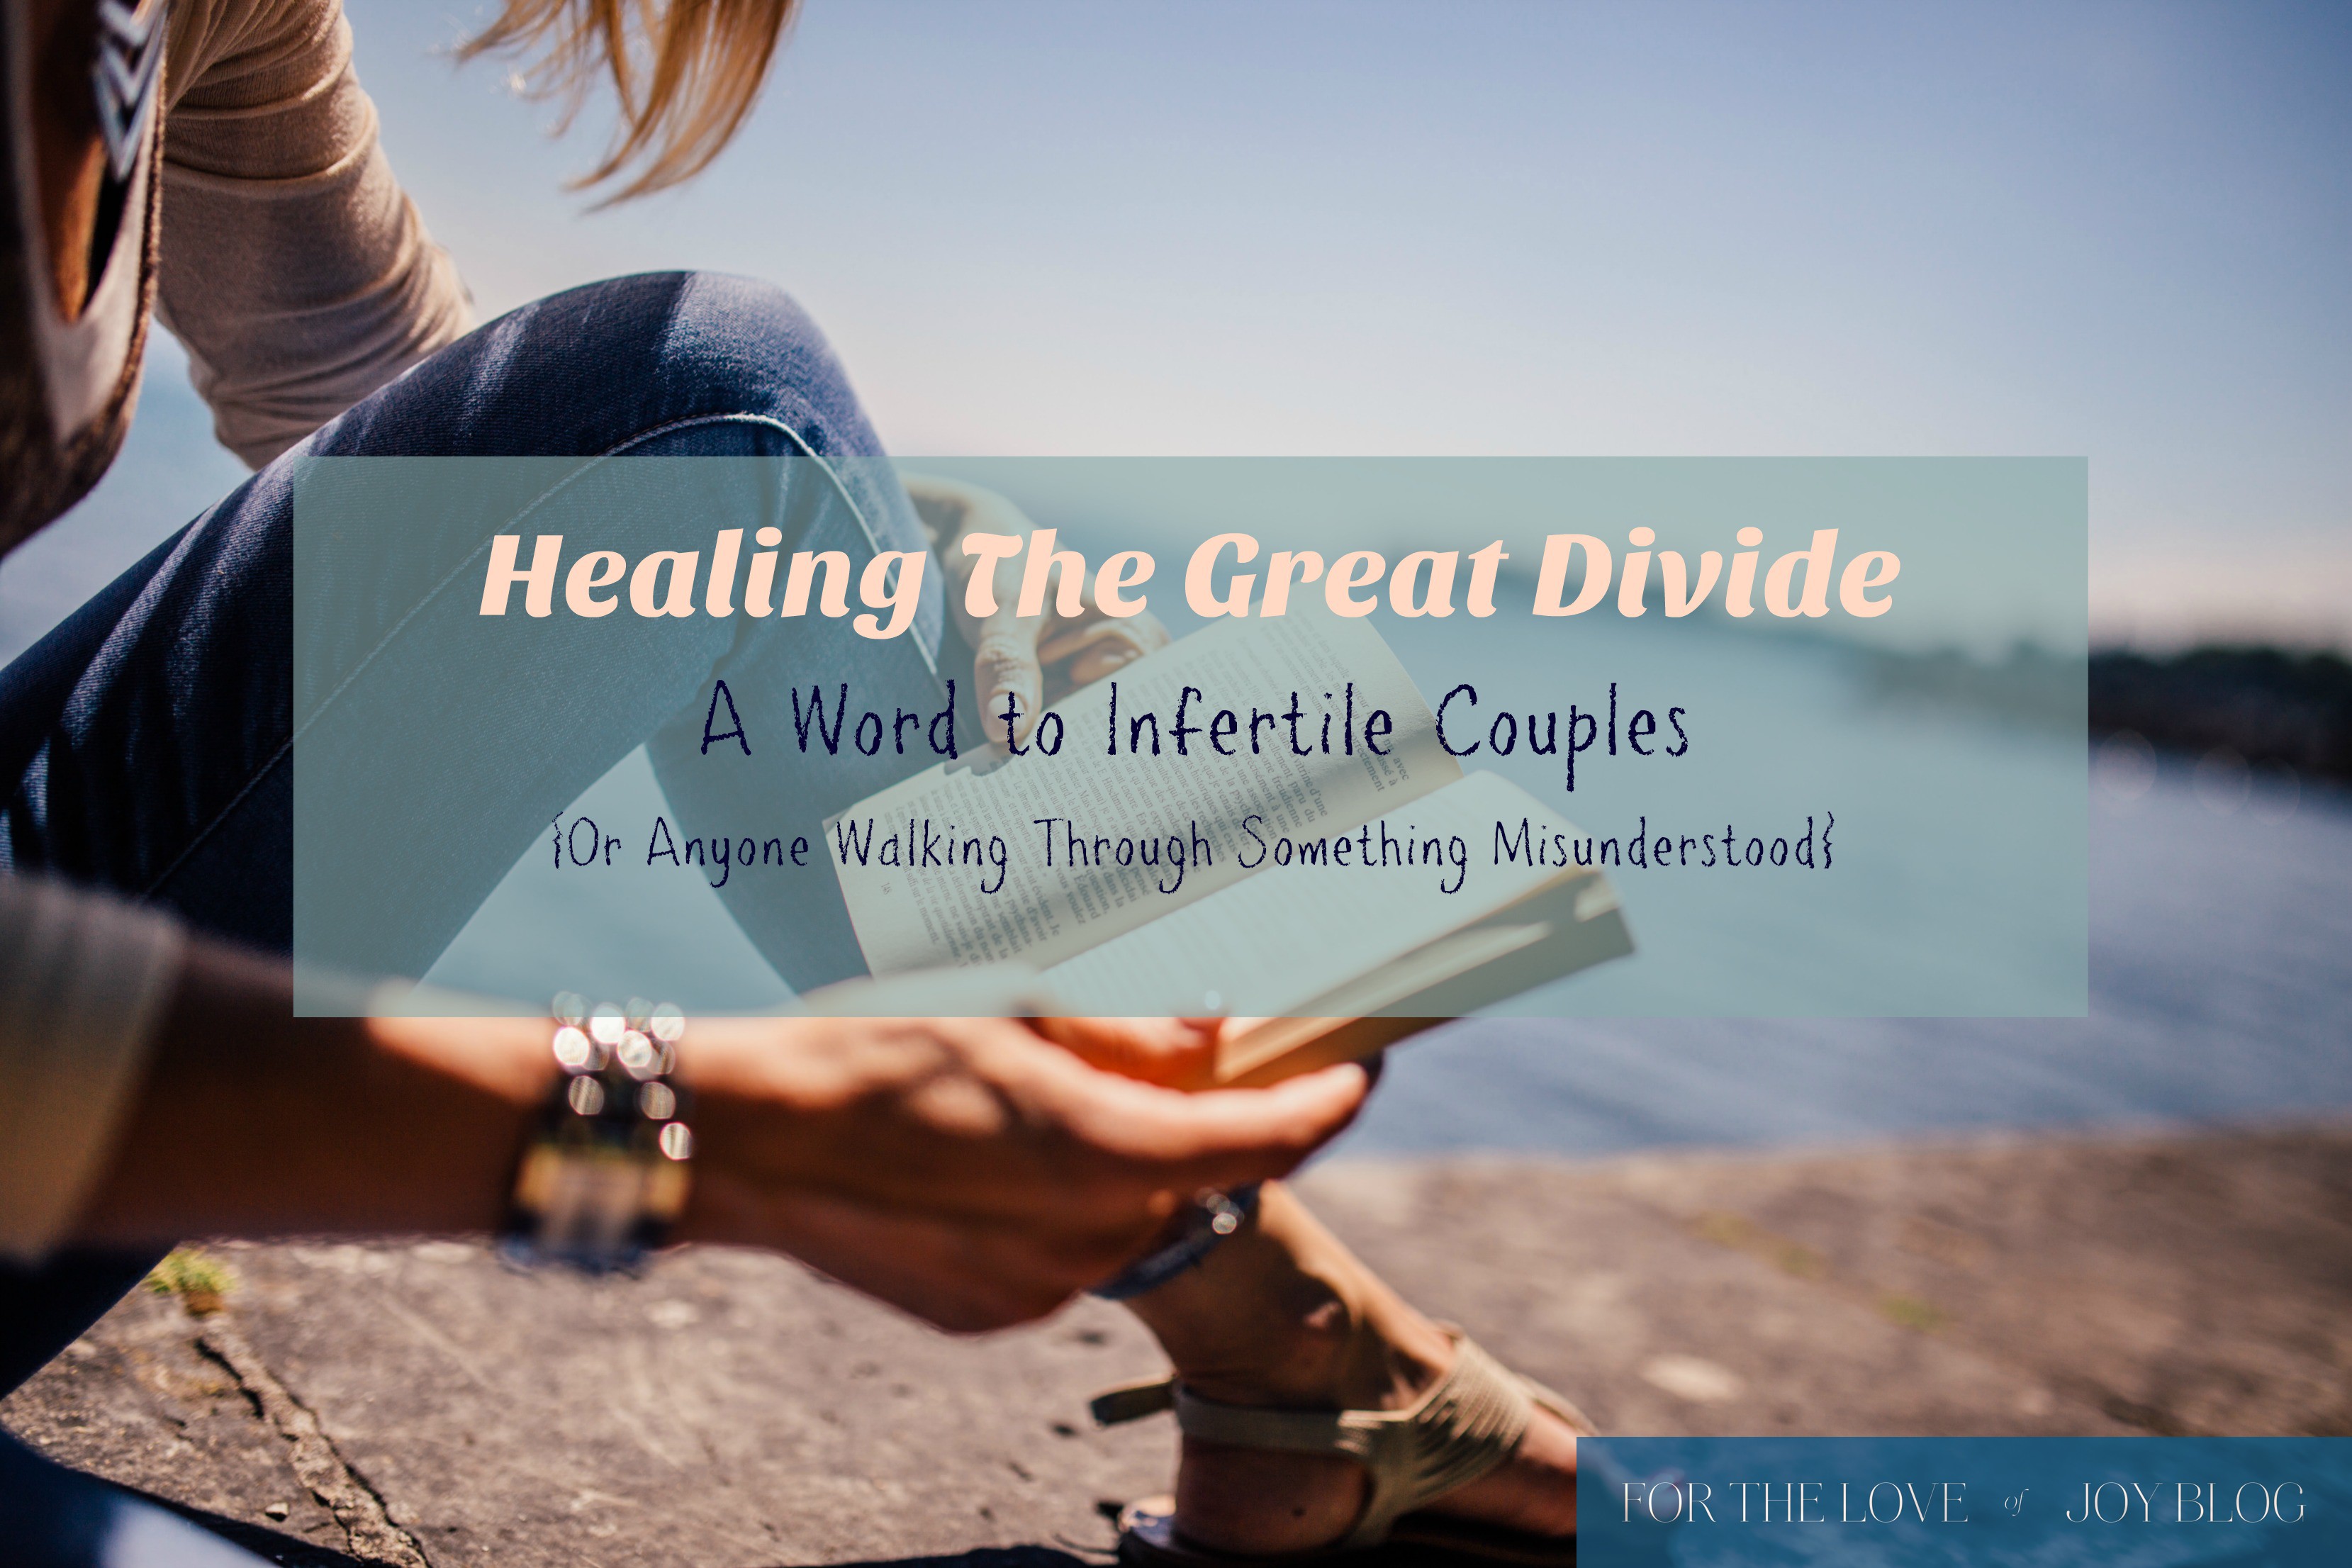 Healing the Great Divide: A Word to Infertile Couples